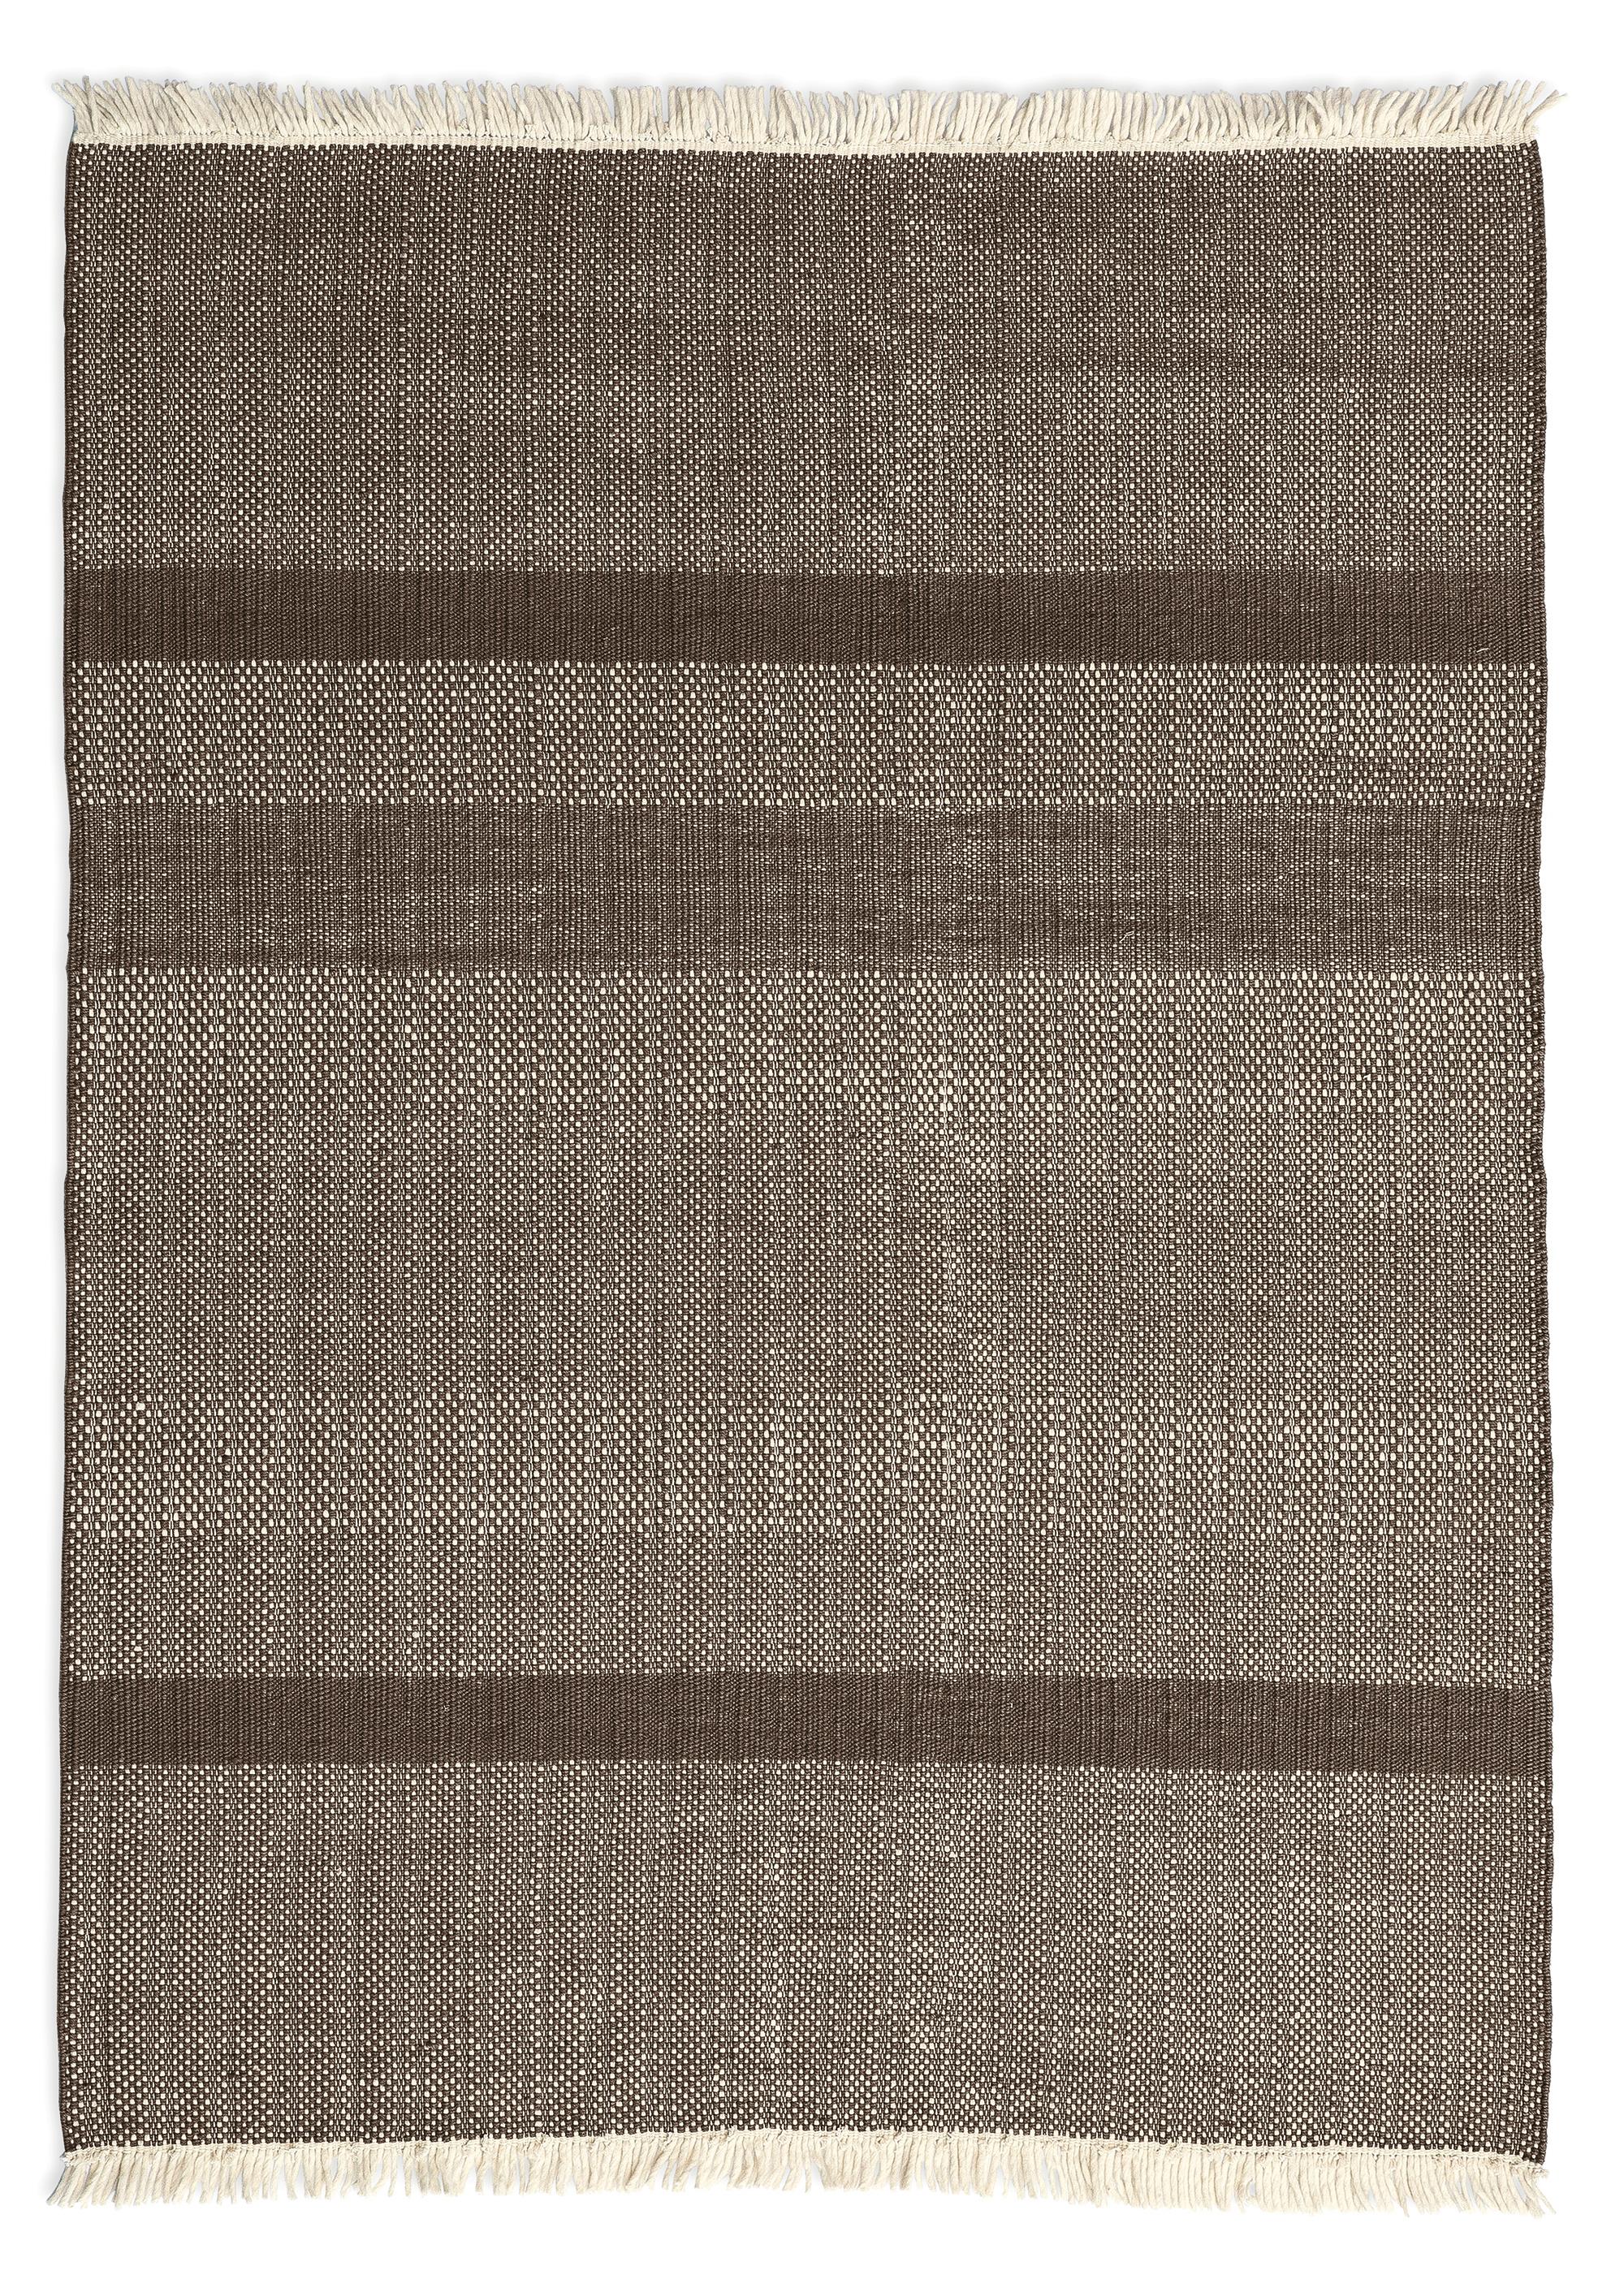 Wool 'Tres Texture' Hand-Loomed Rug for Nanimarquina For Sale